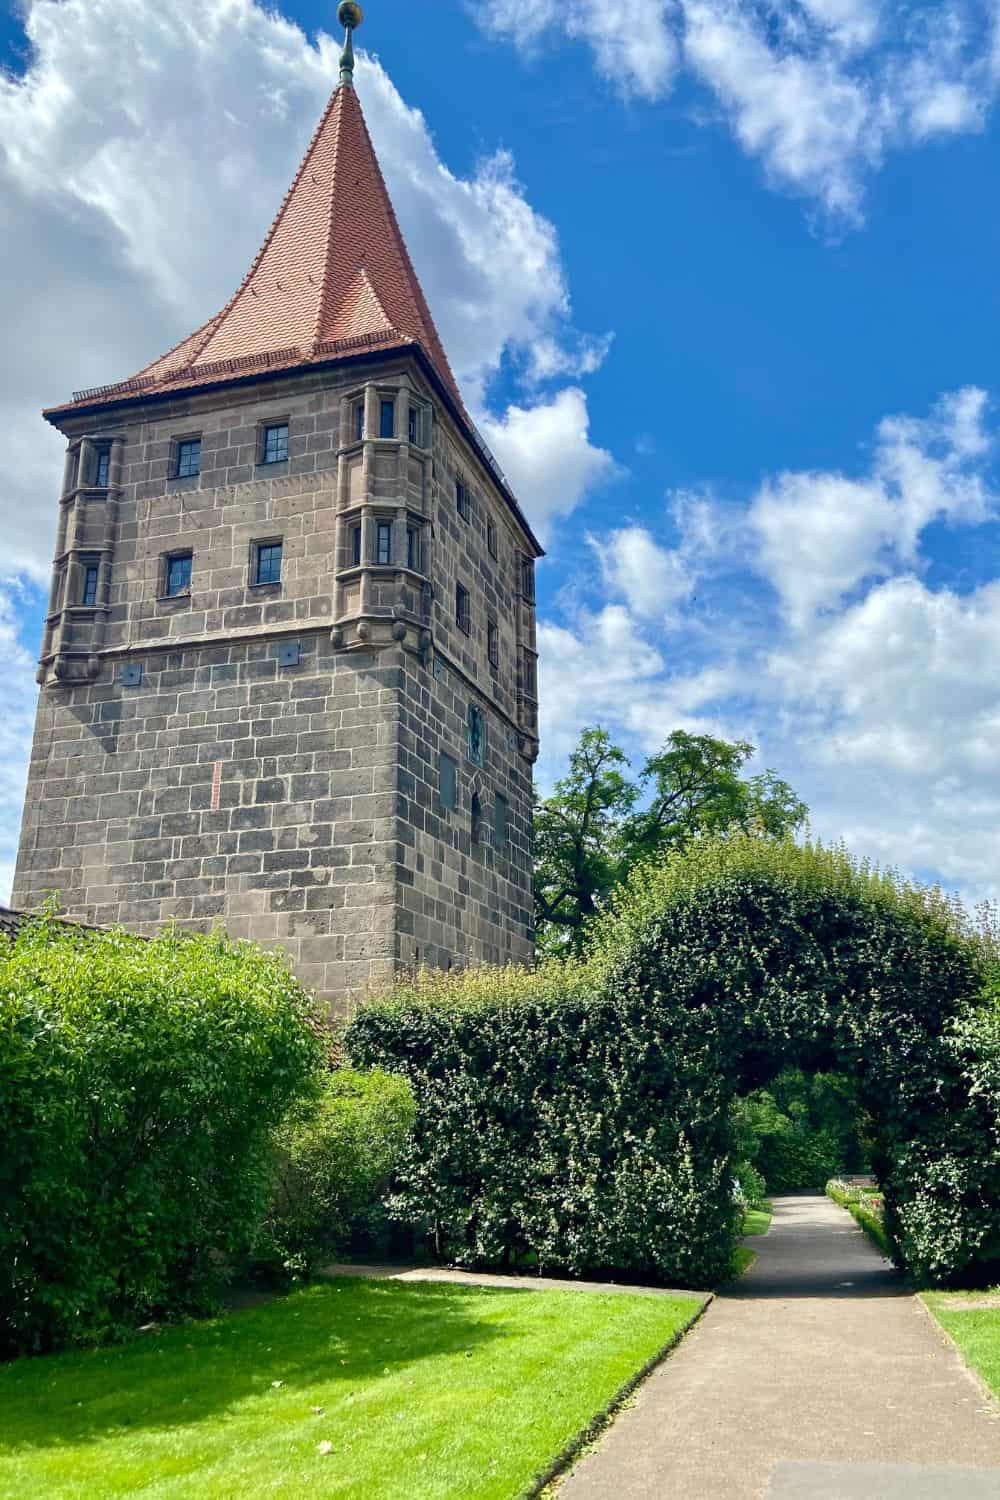 A vibrant view of a historic tower in Nuremberg, with its steep red roof and stone facade, rising majestically against a bright blue sky with wisps of white clouds. The tower is surrounded by lush greenery and a neatly trimmed hedge archway, leading to a path that promises an intimate glimpse into the city's medieval past.